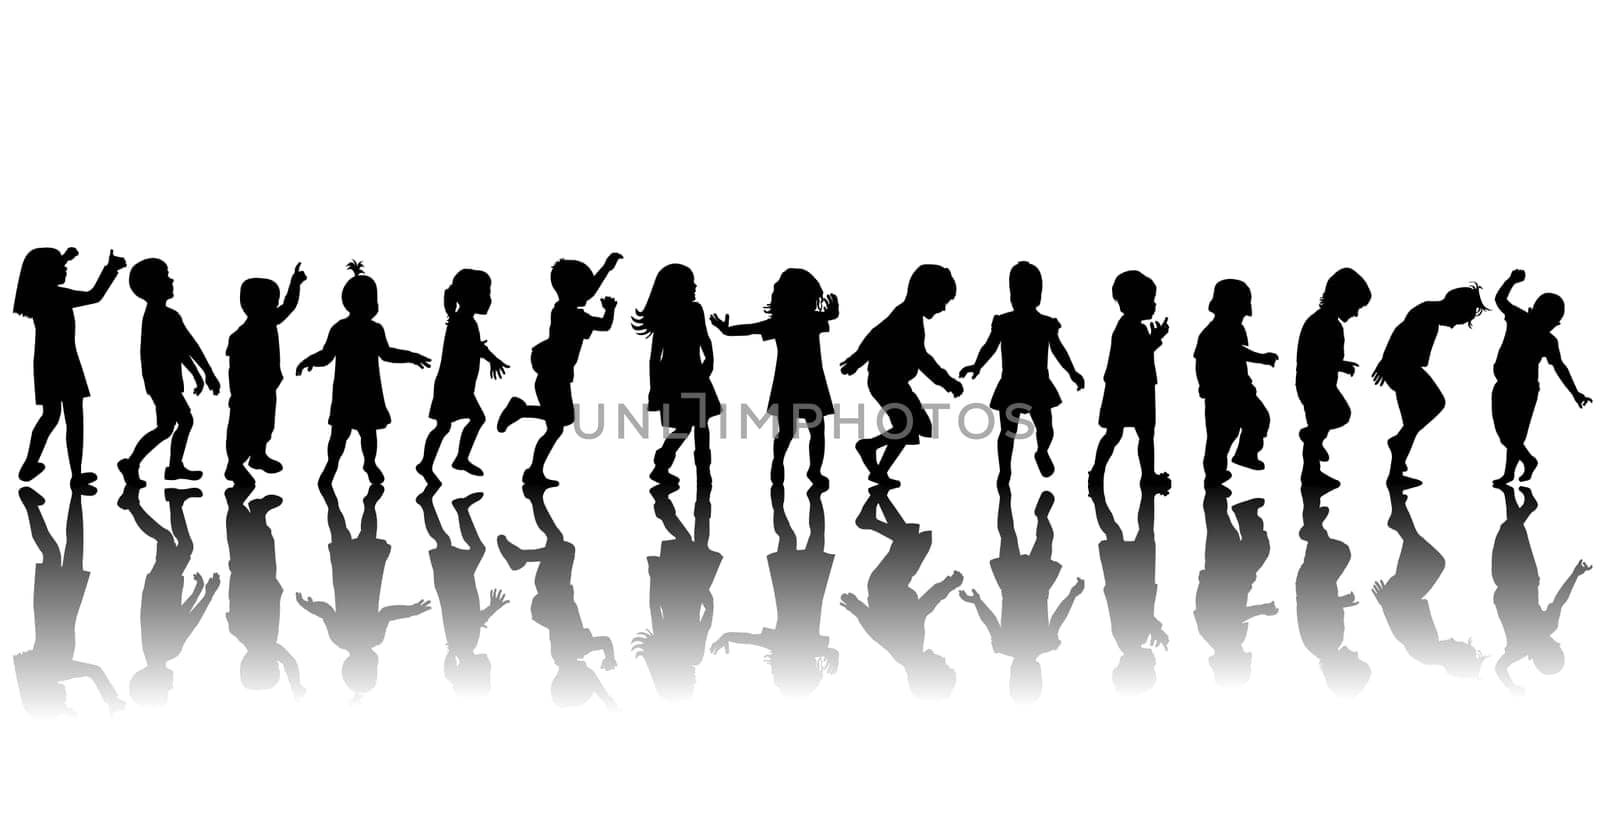 Collection of children silhouettes with shadows, on white background by hibrida13